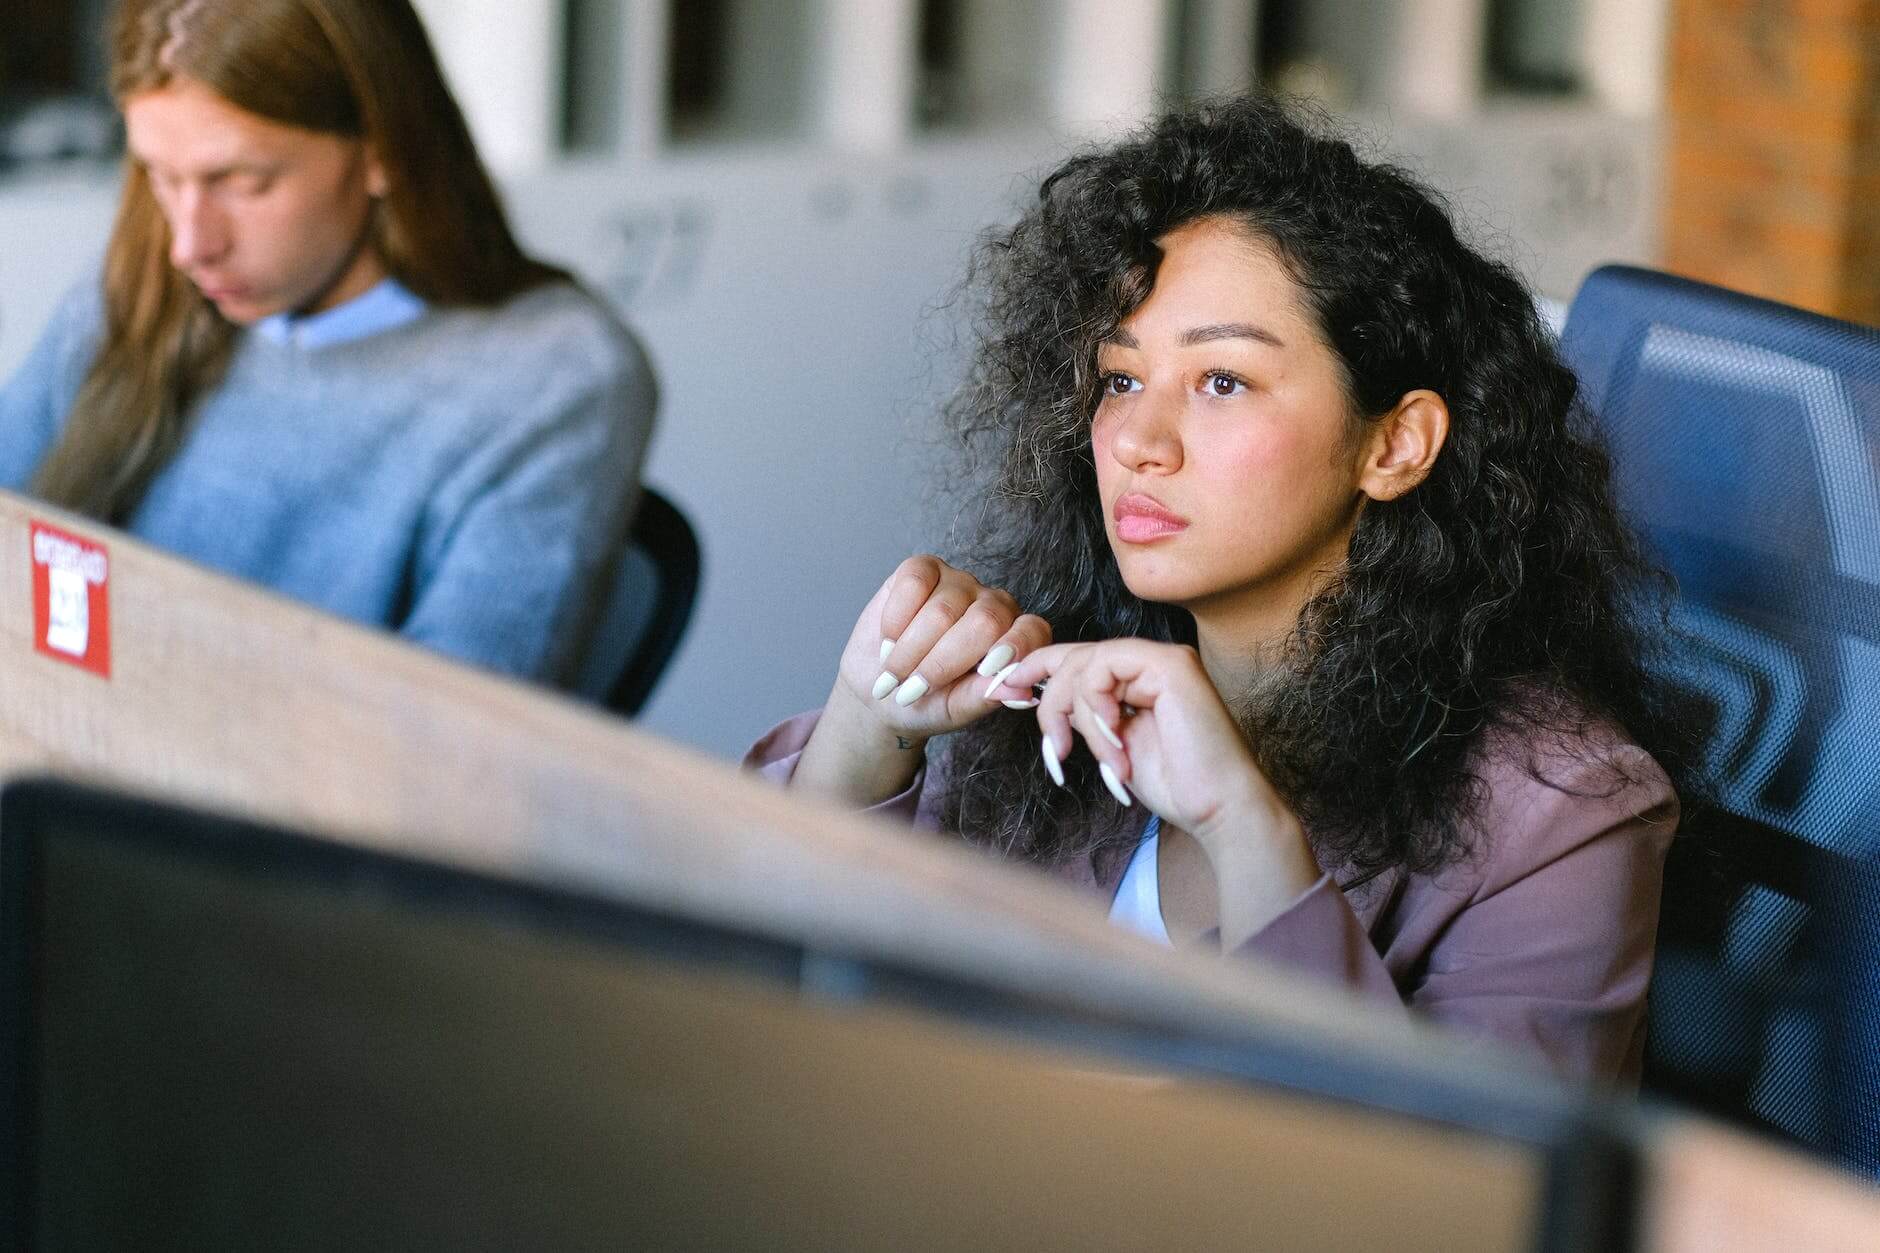 focused woman thinking on problem in office